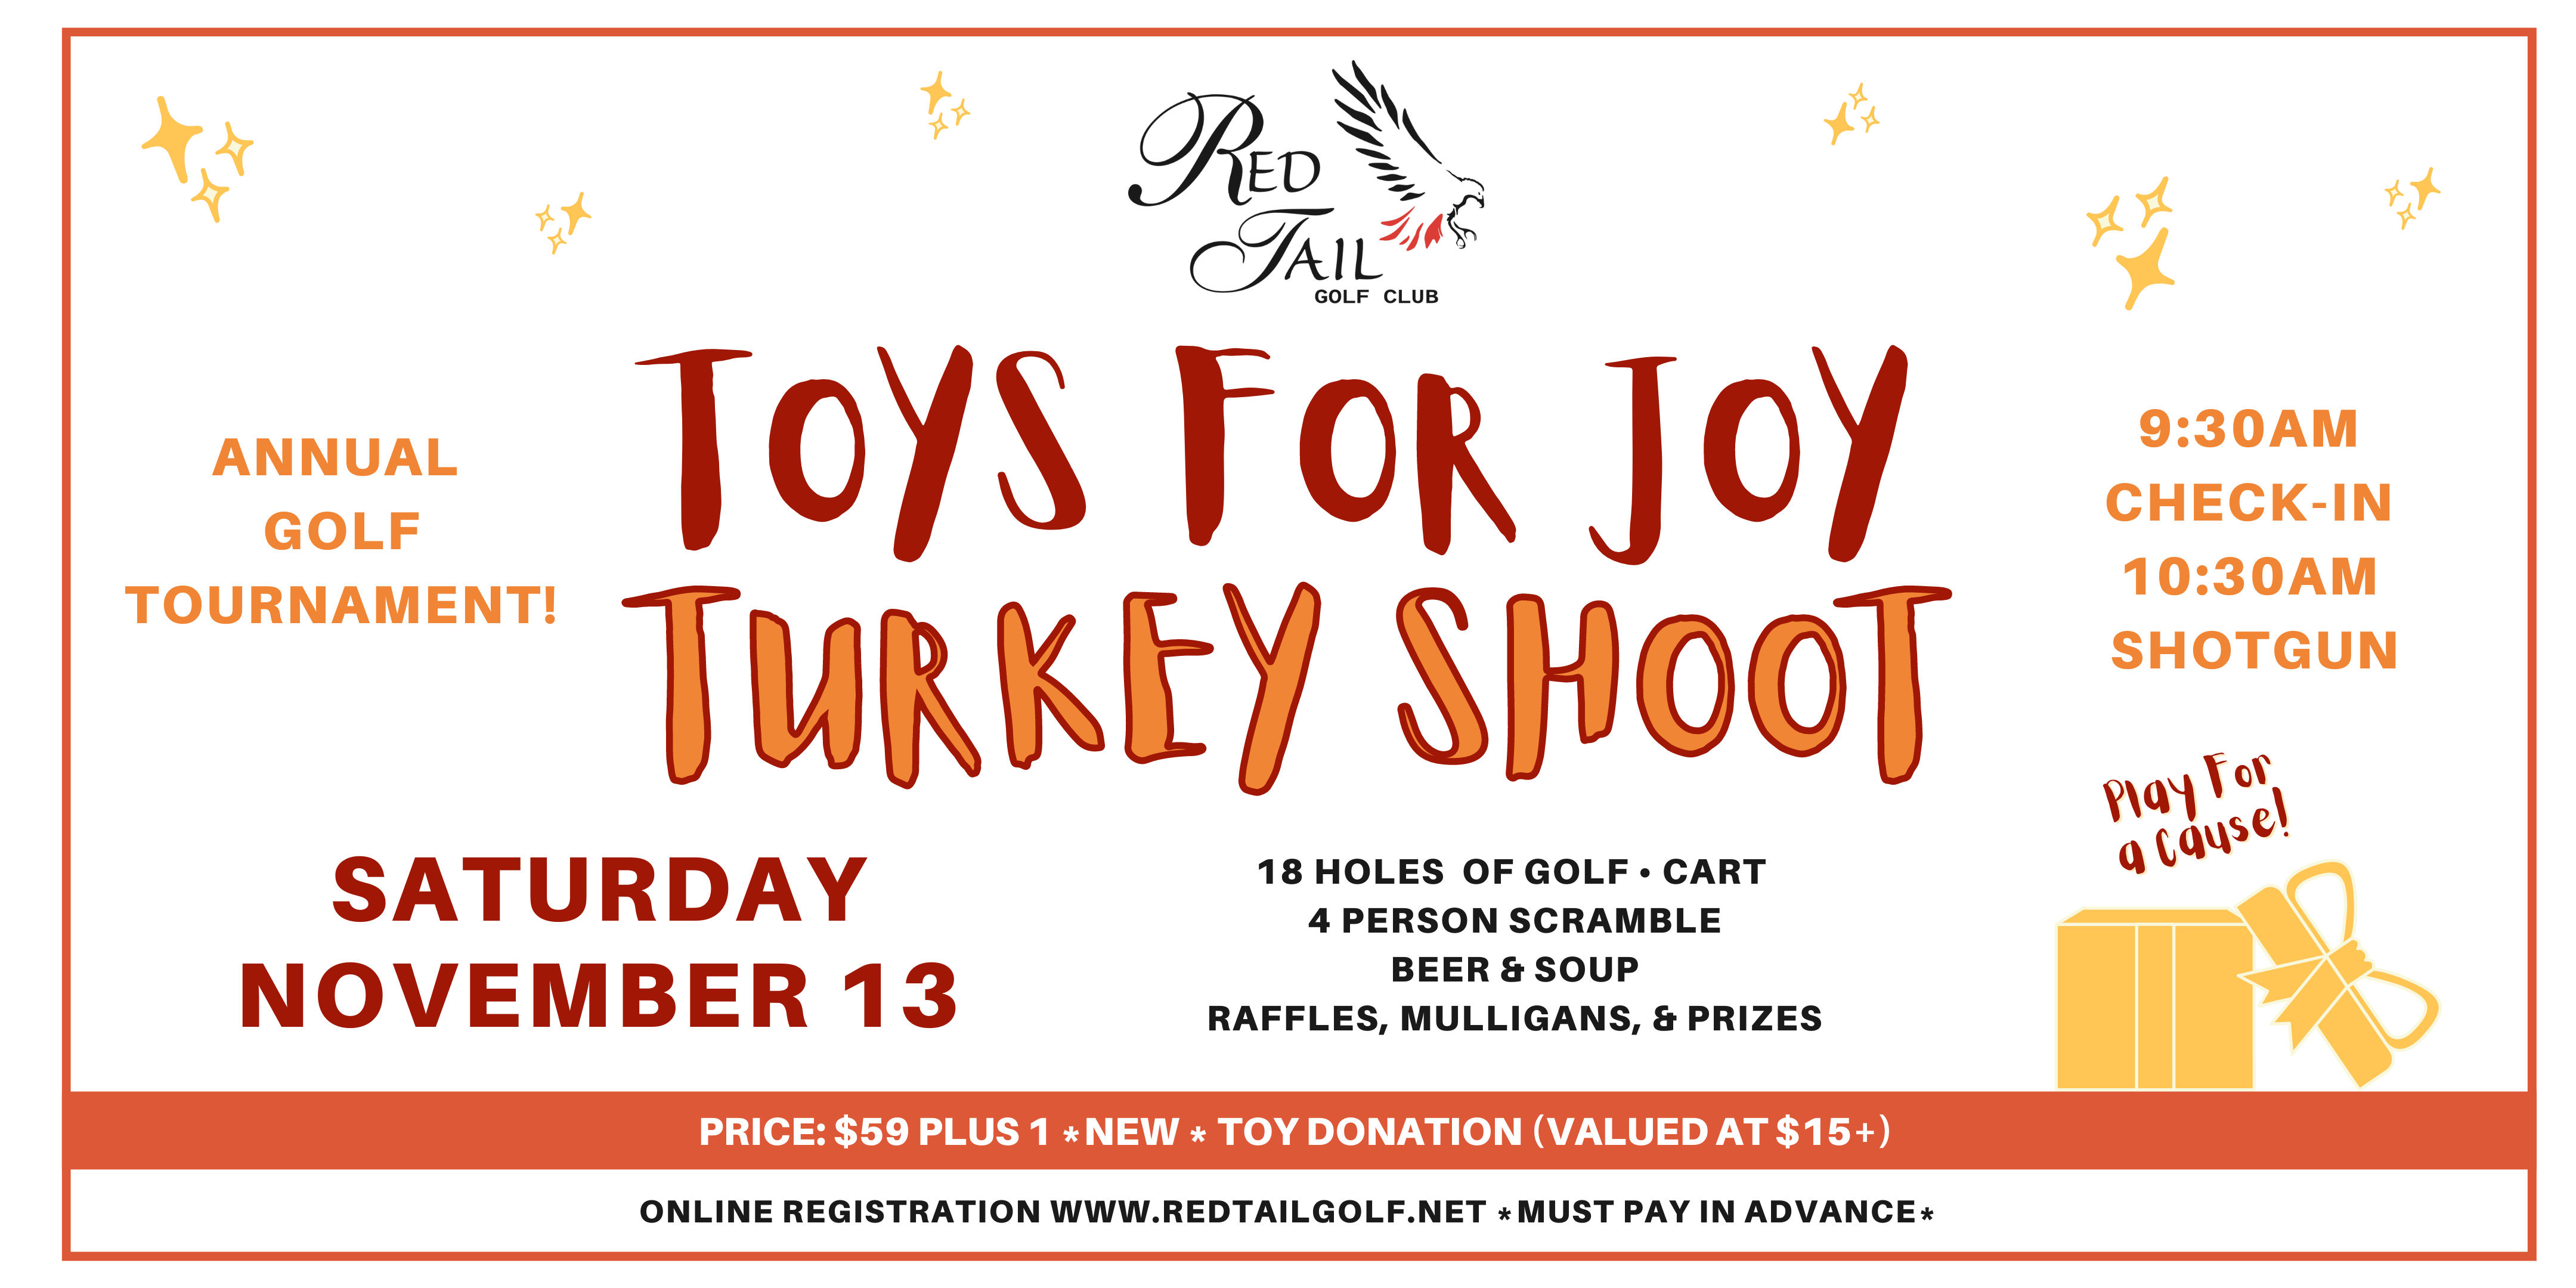 2021 TOYS FOR JOY Turkey Shoot Golf Tournament at Red Tail Golf Club